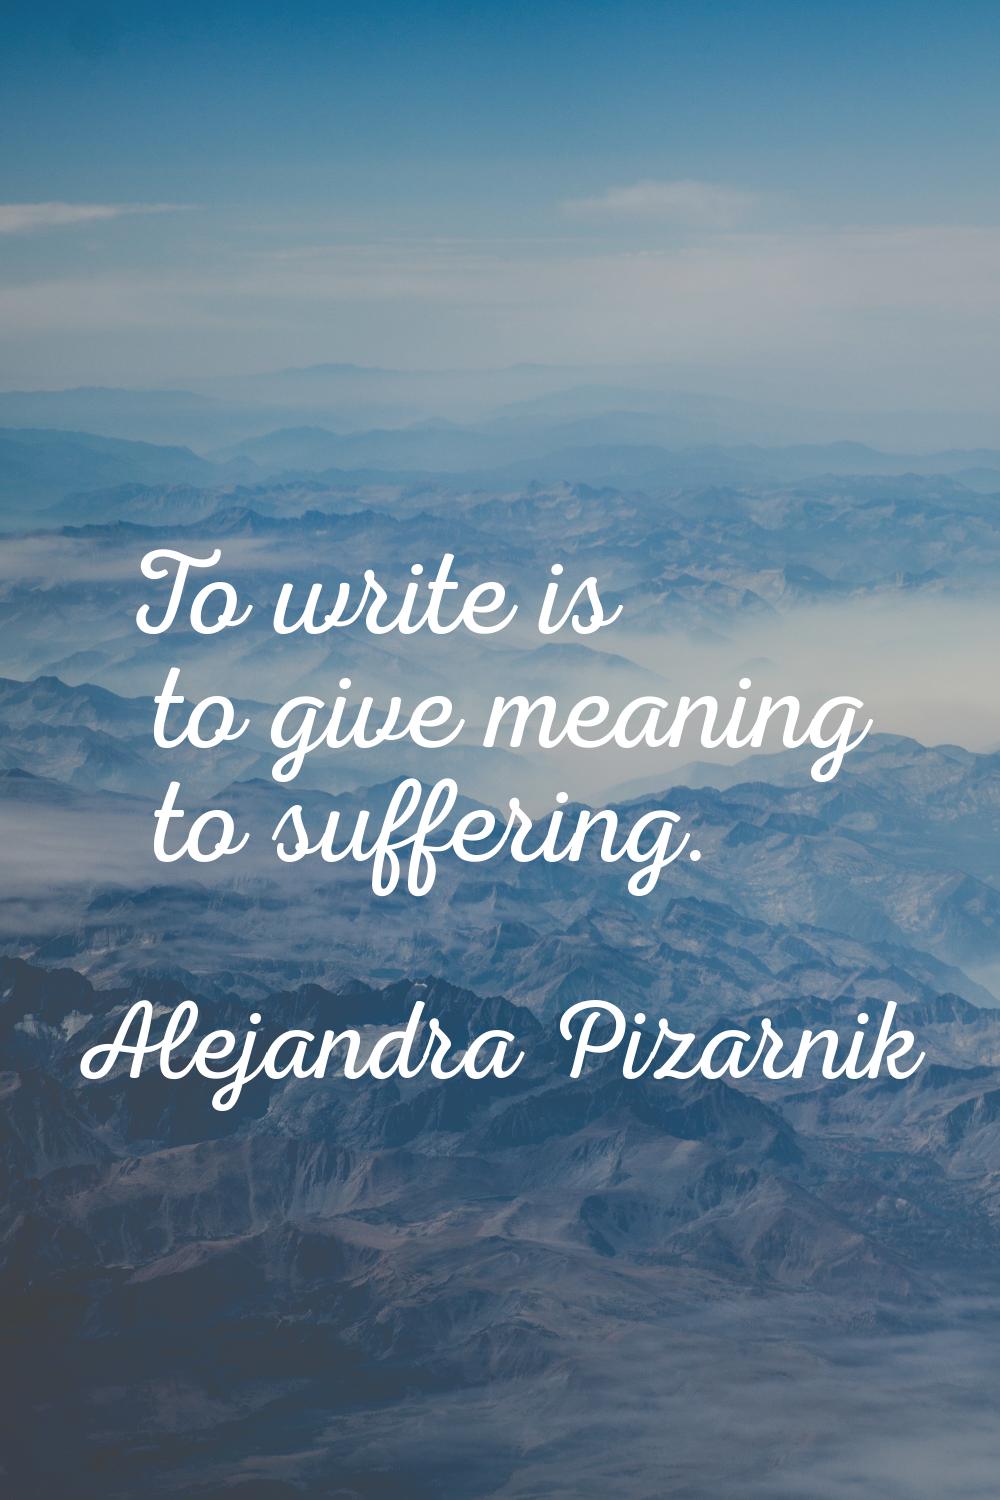 To write is to give meaning to suffering.